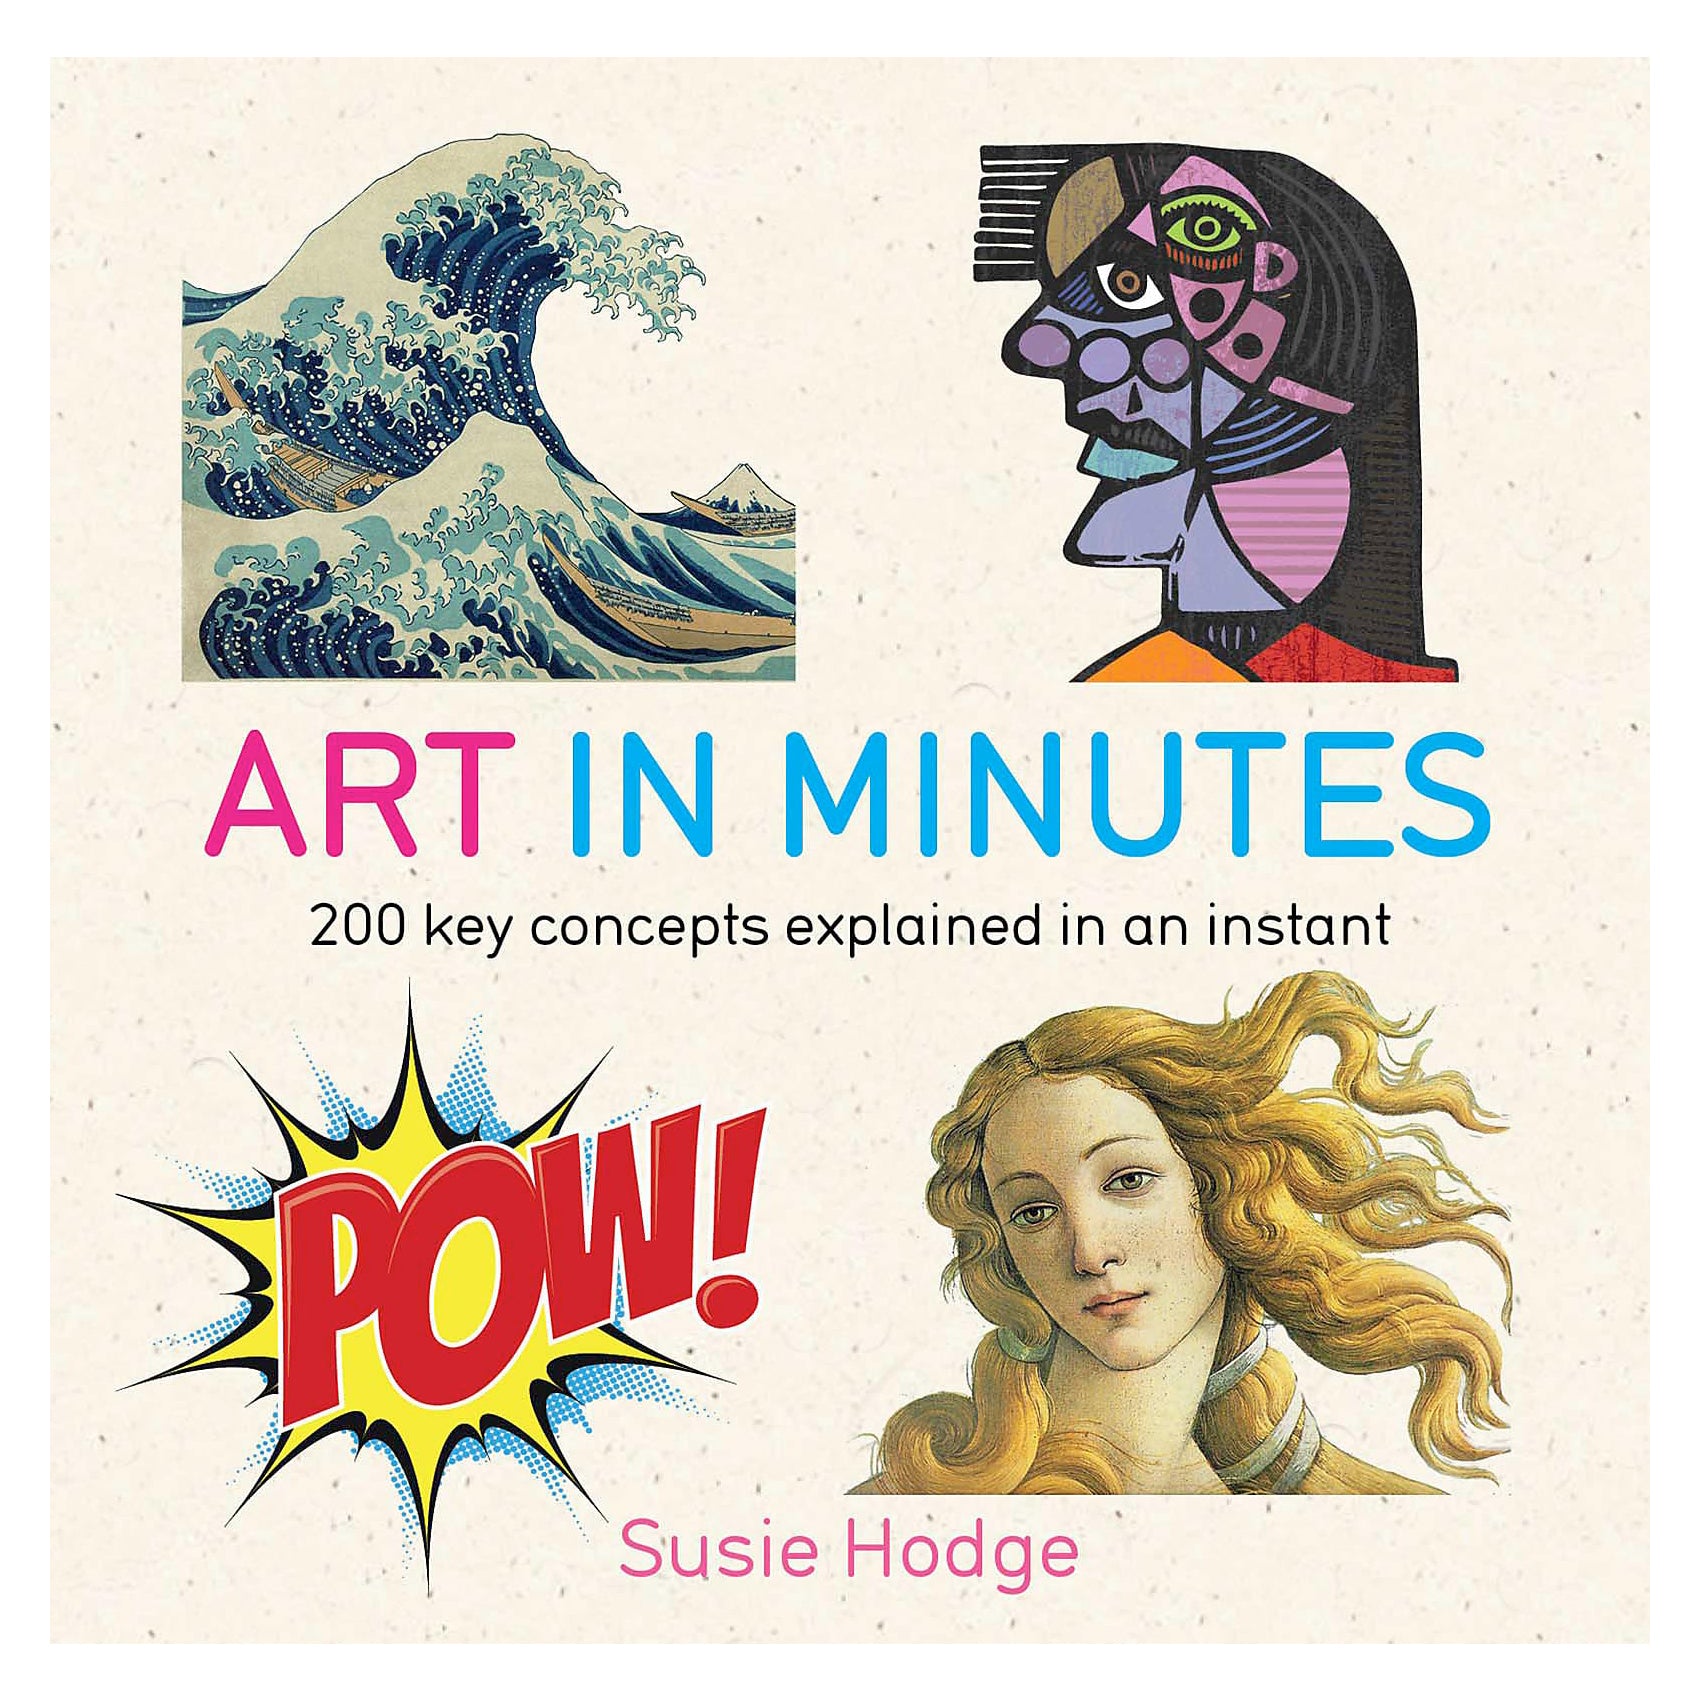 Art in Minutes 200 Key Concepts Explained in an Instant